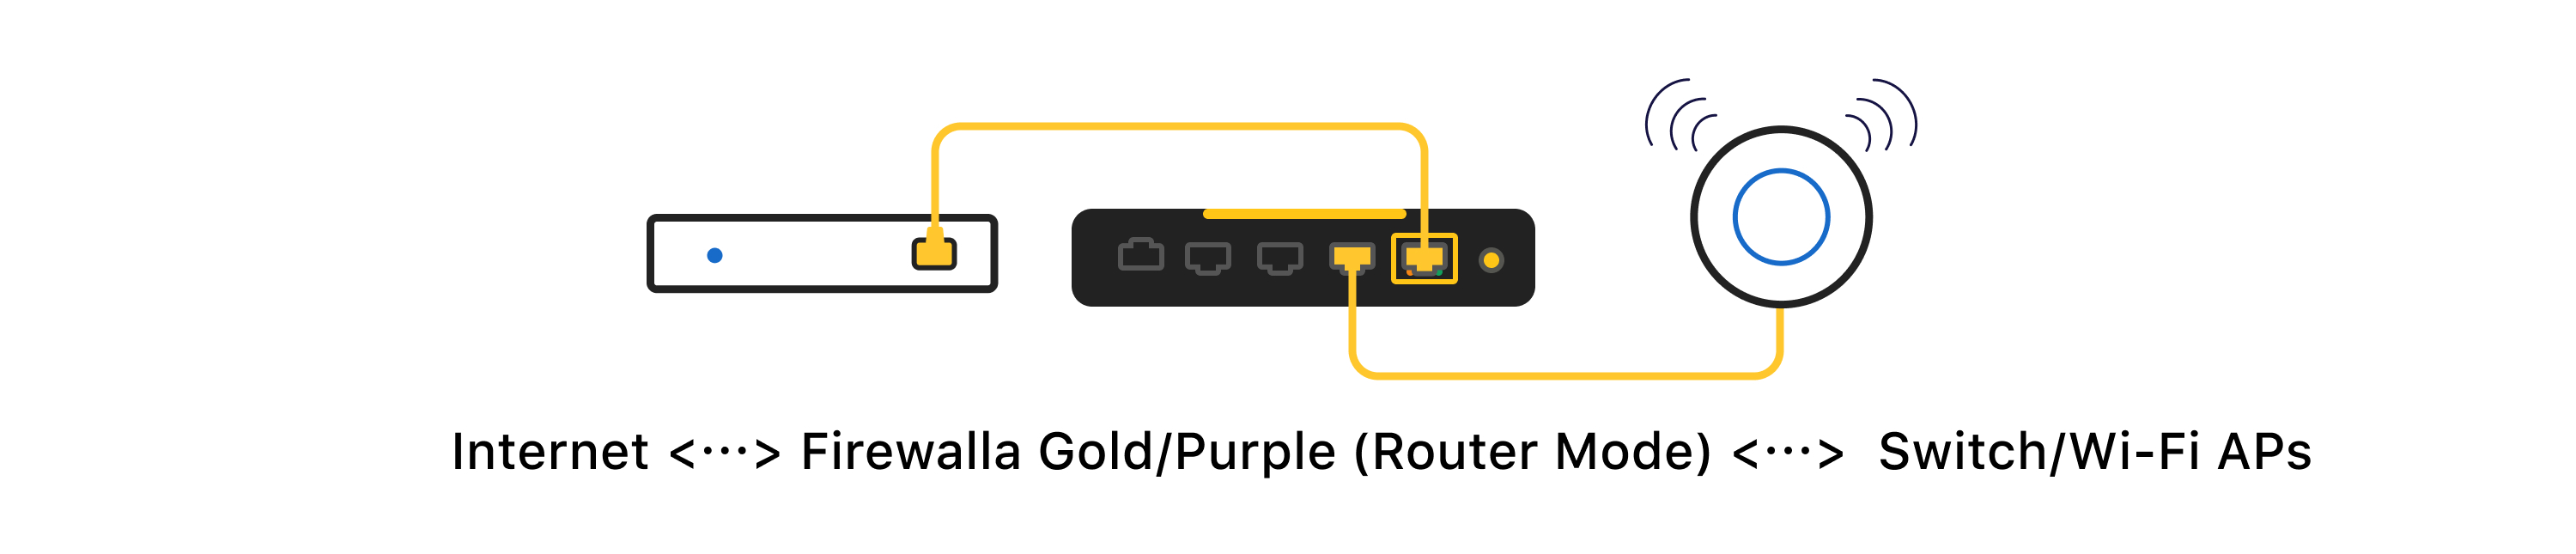 Firewalla Gold diagram featuring Internet, Gold/Purple in Router Mode, and Switch/WiFi Aps